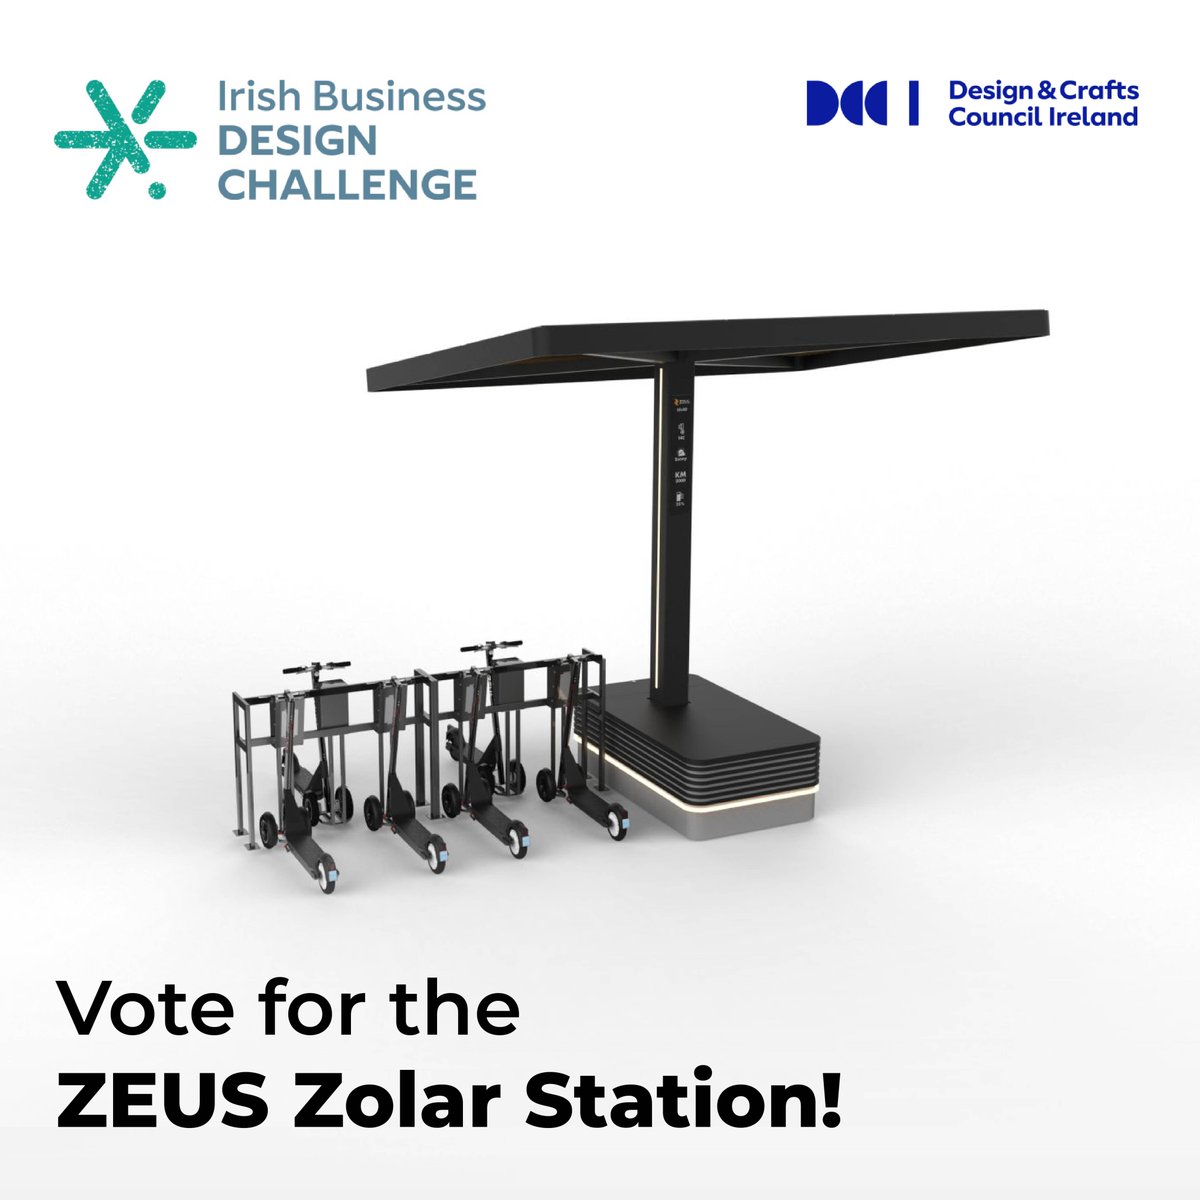 Vote for the Zeus Scooters Zolar Station in the Irish Business Design Challenge by the Design & Crafts Council Ireland. Our solution is a game changer for the industry and we're super-excited to be participating in this challenge. lnkd.in/egii4WxC Thank you!